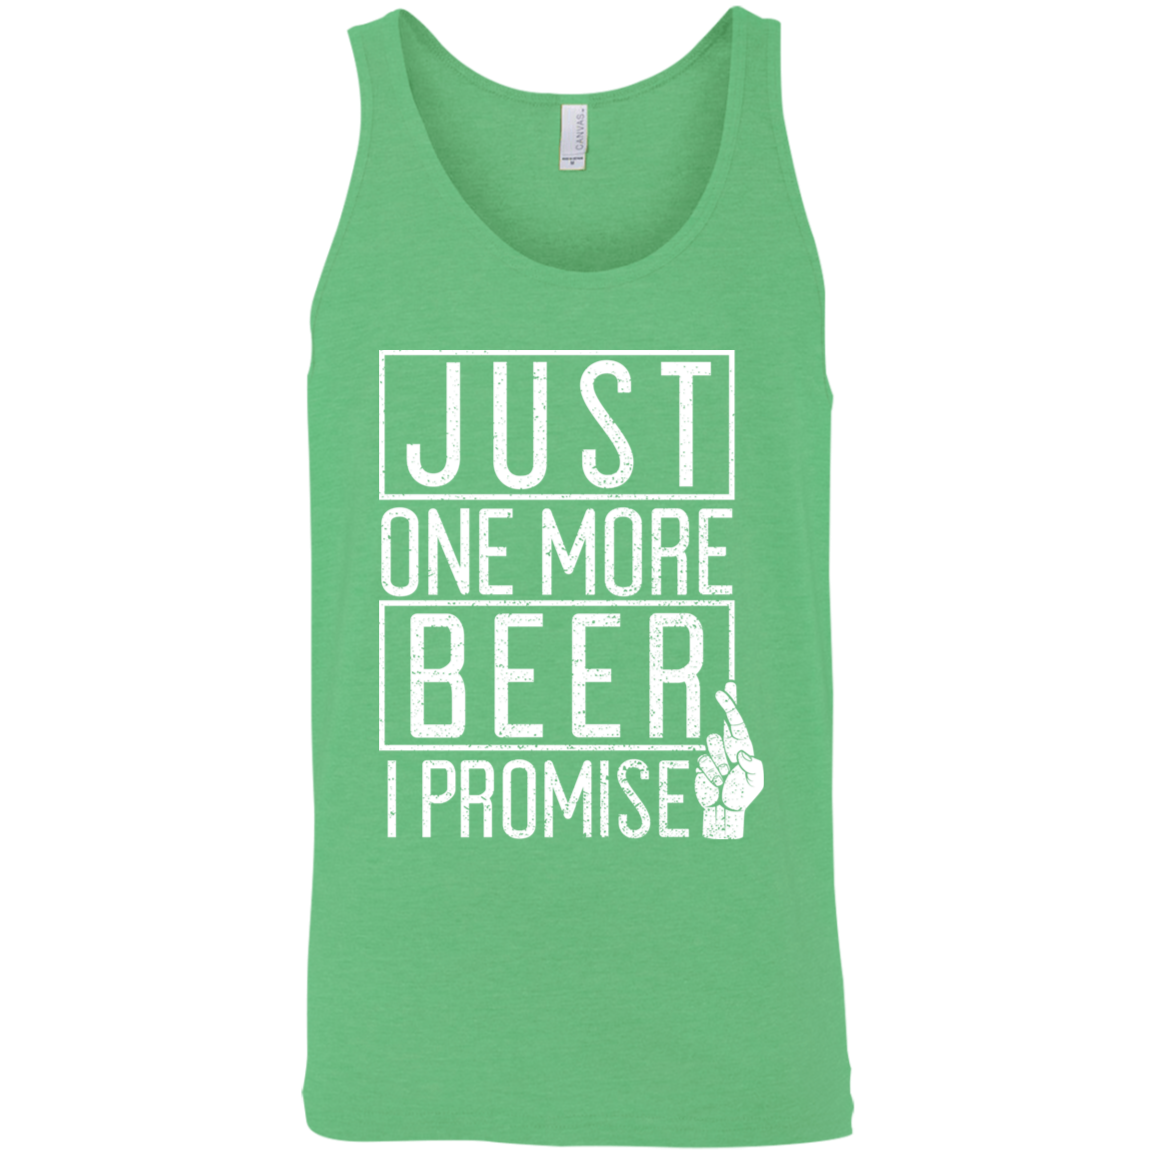 Just One More Beer I Promise Tank Top T-Shirts - The Beer Lodge